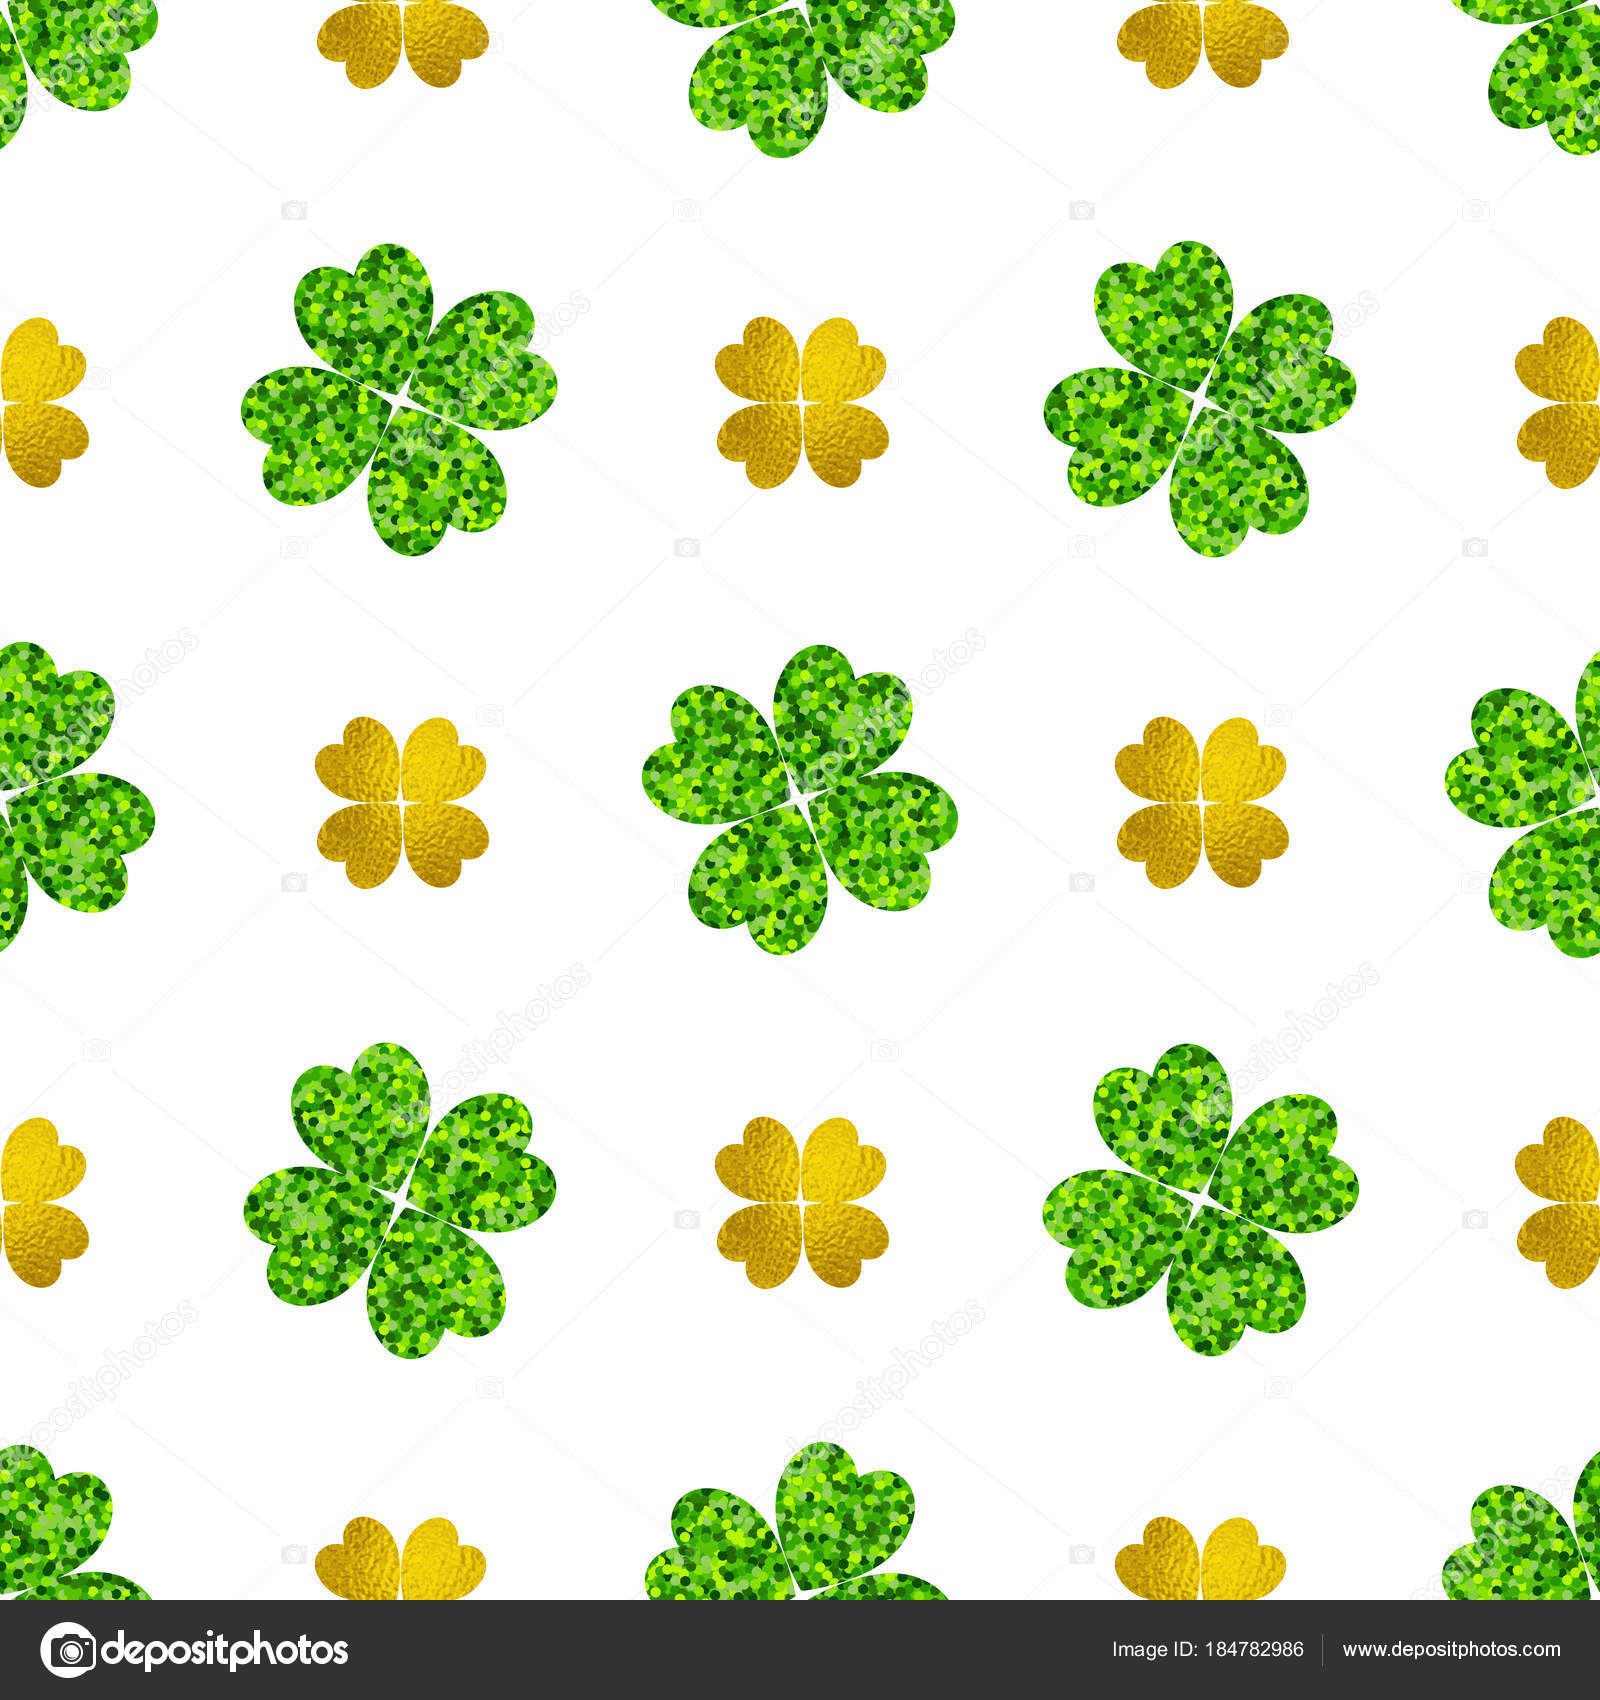 St.Patrick's day seamless pattern with clover leaves and golden